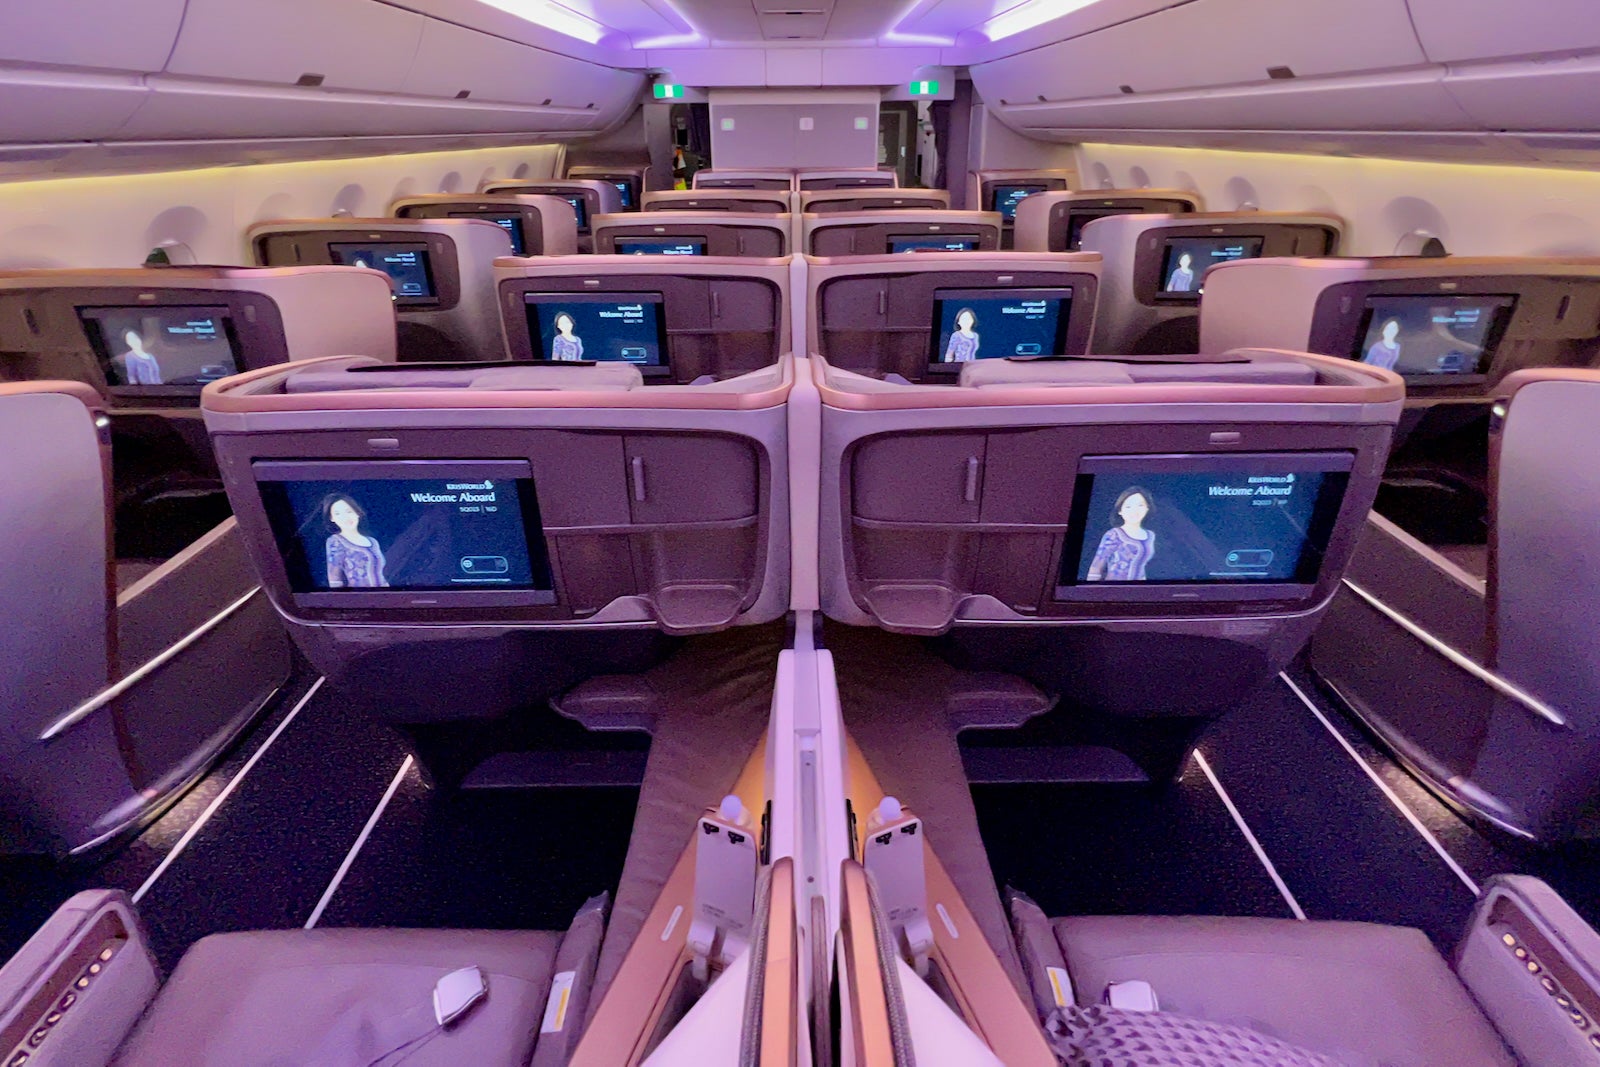 REVIEW: This isn't any short haul flightthis is a Qatar Airways